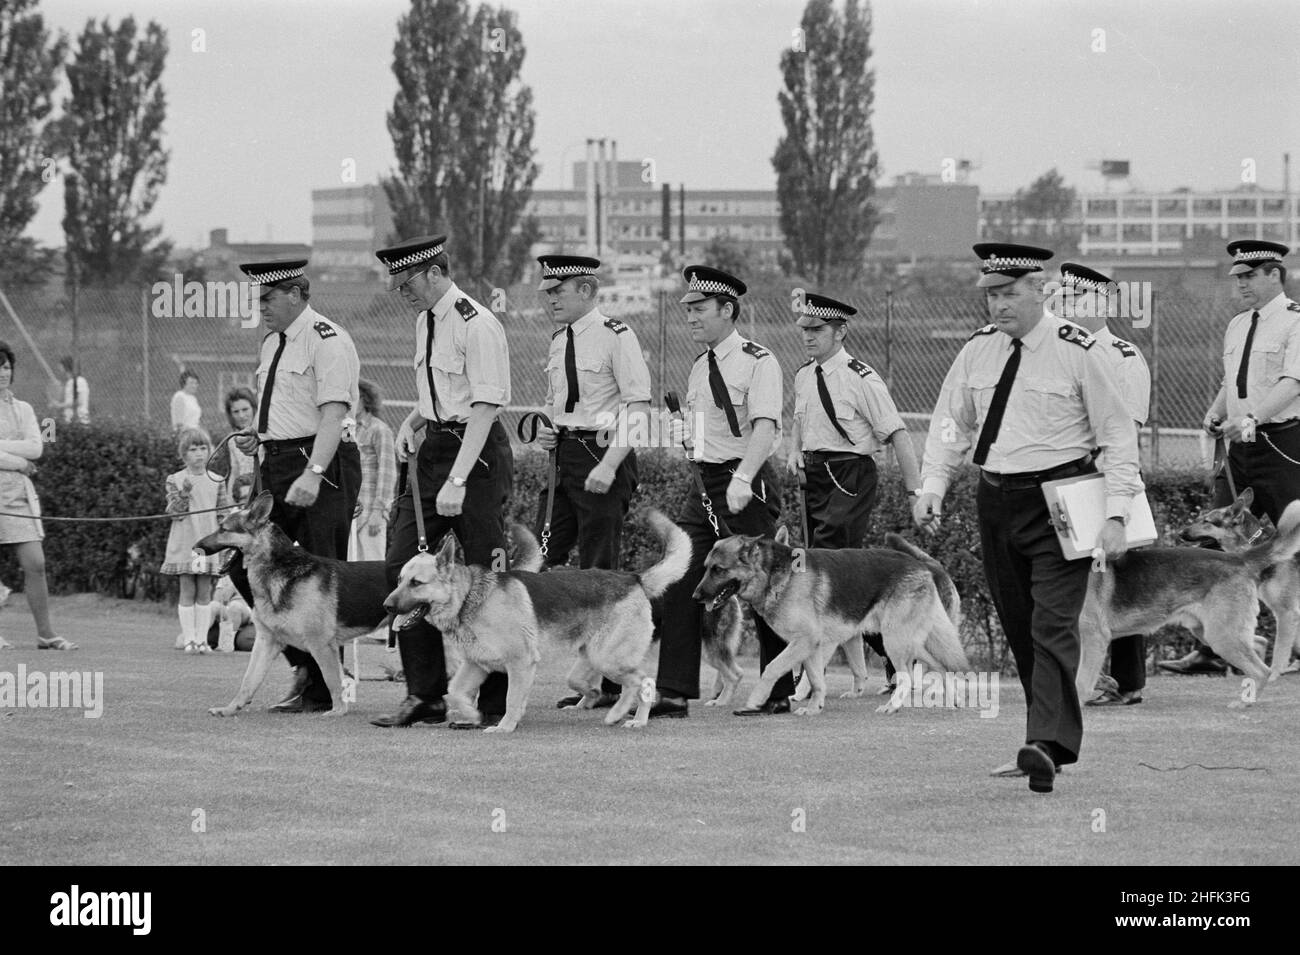 Laing Sports Ground, Rowley Lane, Elstree, Barnet, London, 09/06/1973. Police dog handlers leading their dogs during a demonstration at the annual Gala Day held at the Laing Sports Ground at Elstree. The annual Gala Day was held at the Laing Sports Ground on 9th June 1973. Attractions included model aircraft, the Royal British Legion band, children's races, and sports. Demonstrations of obedience and mock arrests were given by police dogs and handlers. In the evening there was dancing and bingo in the Club House, and 'beer and beat' in the marquee. Over 2,000 people attended the gala, and over Stock Photo